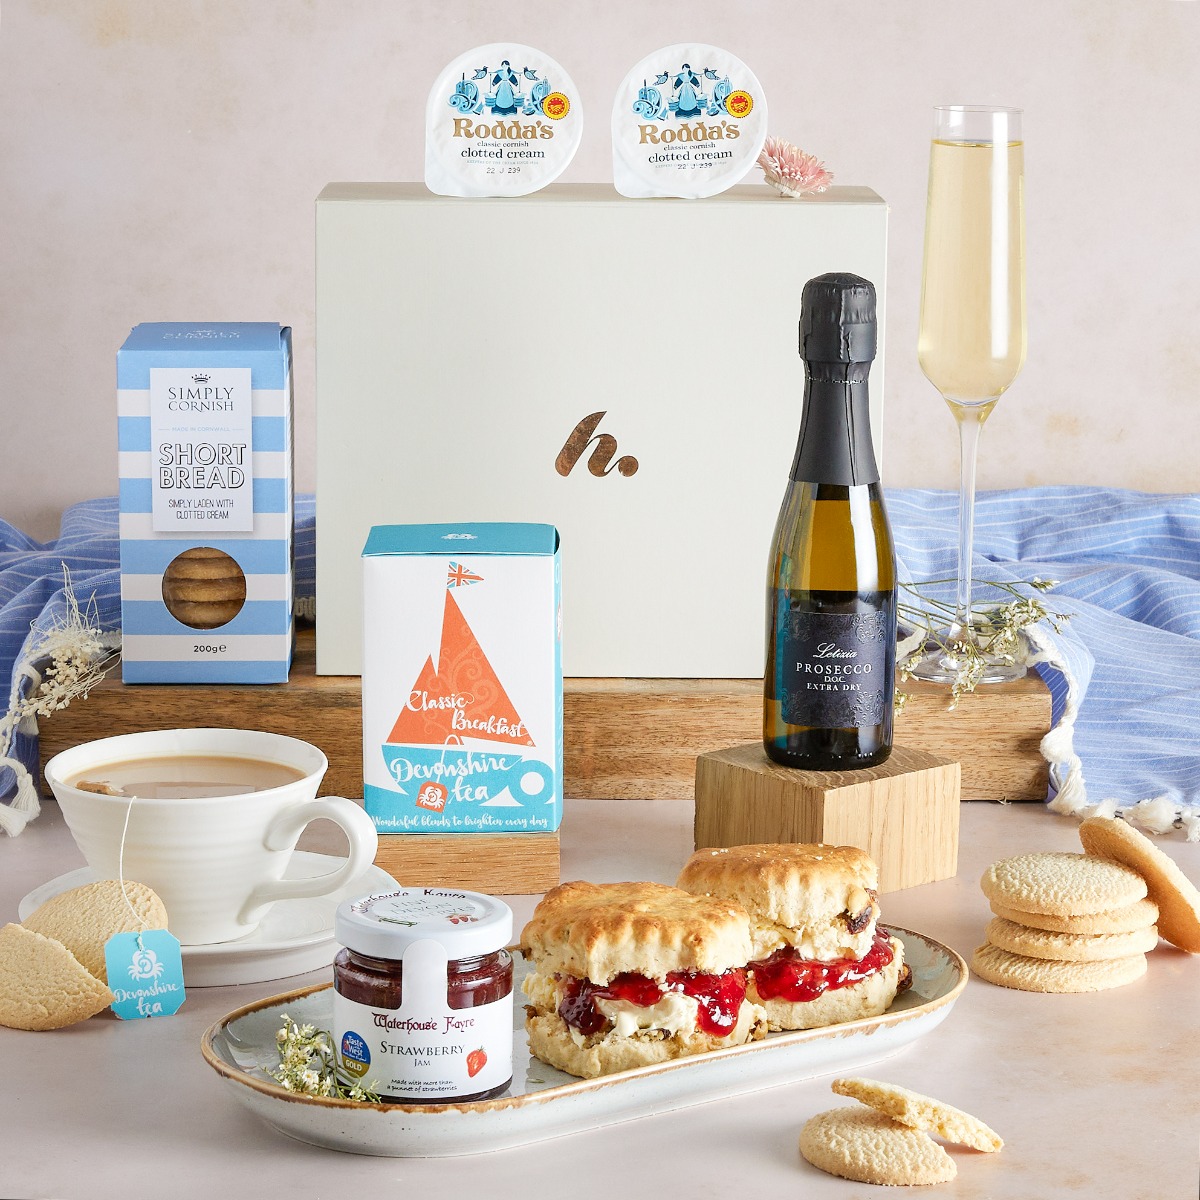 Afternoon Cream Tea With Prosecco For One Afternoon Tea Hampers Hampers.com